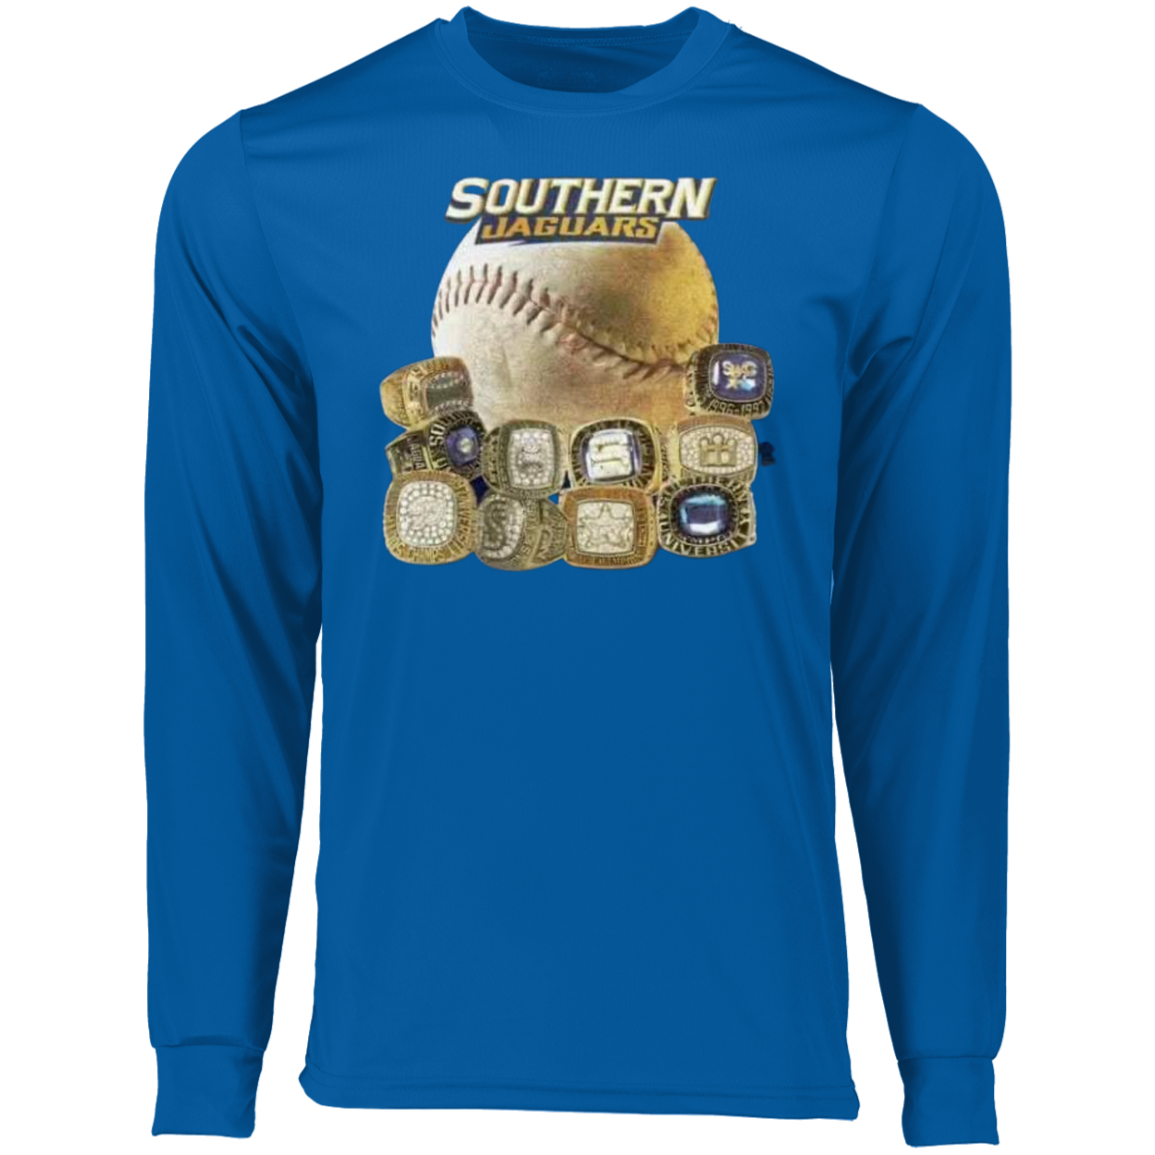 SU Baseball SWAC (Southern Wins Another Championship)  Rings 788 Long Sleeve Moisture-Wicking Tee